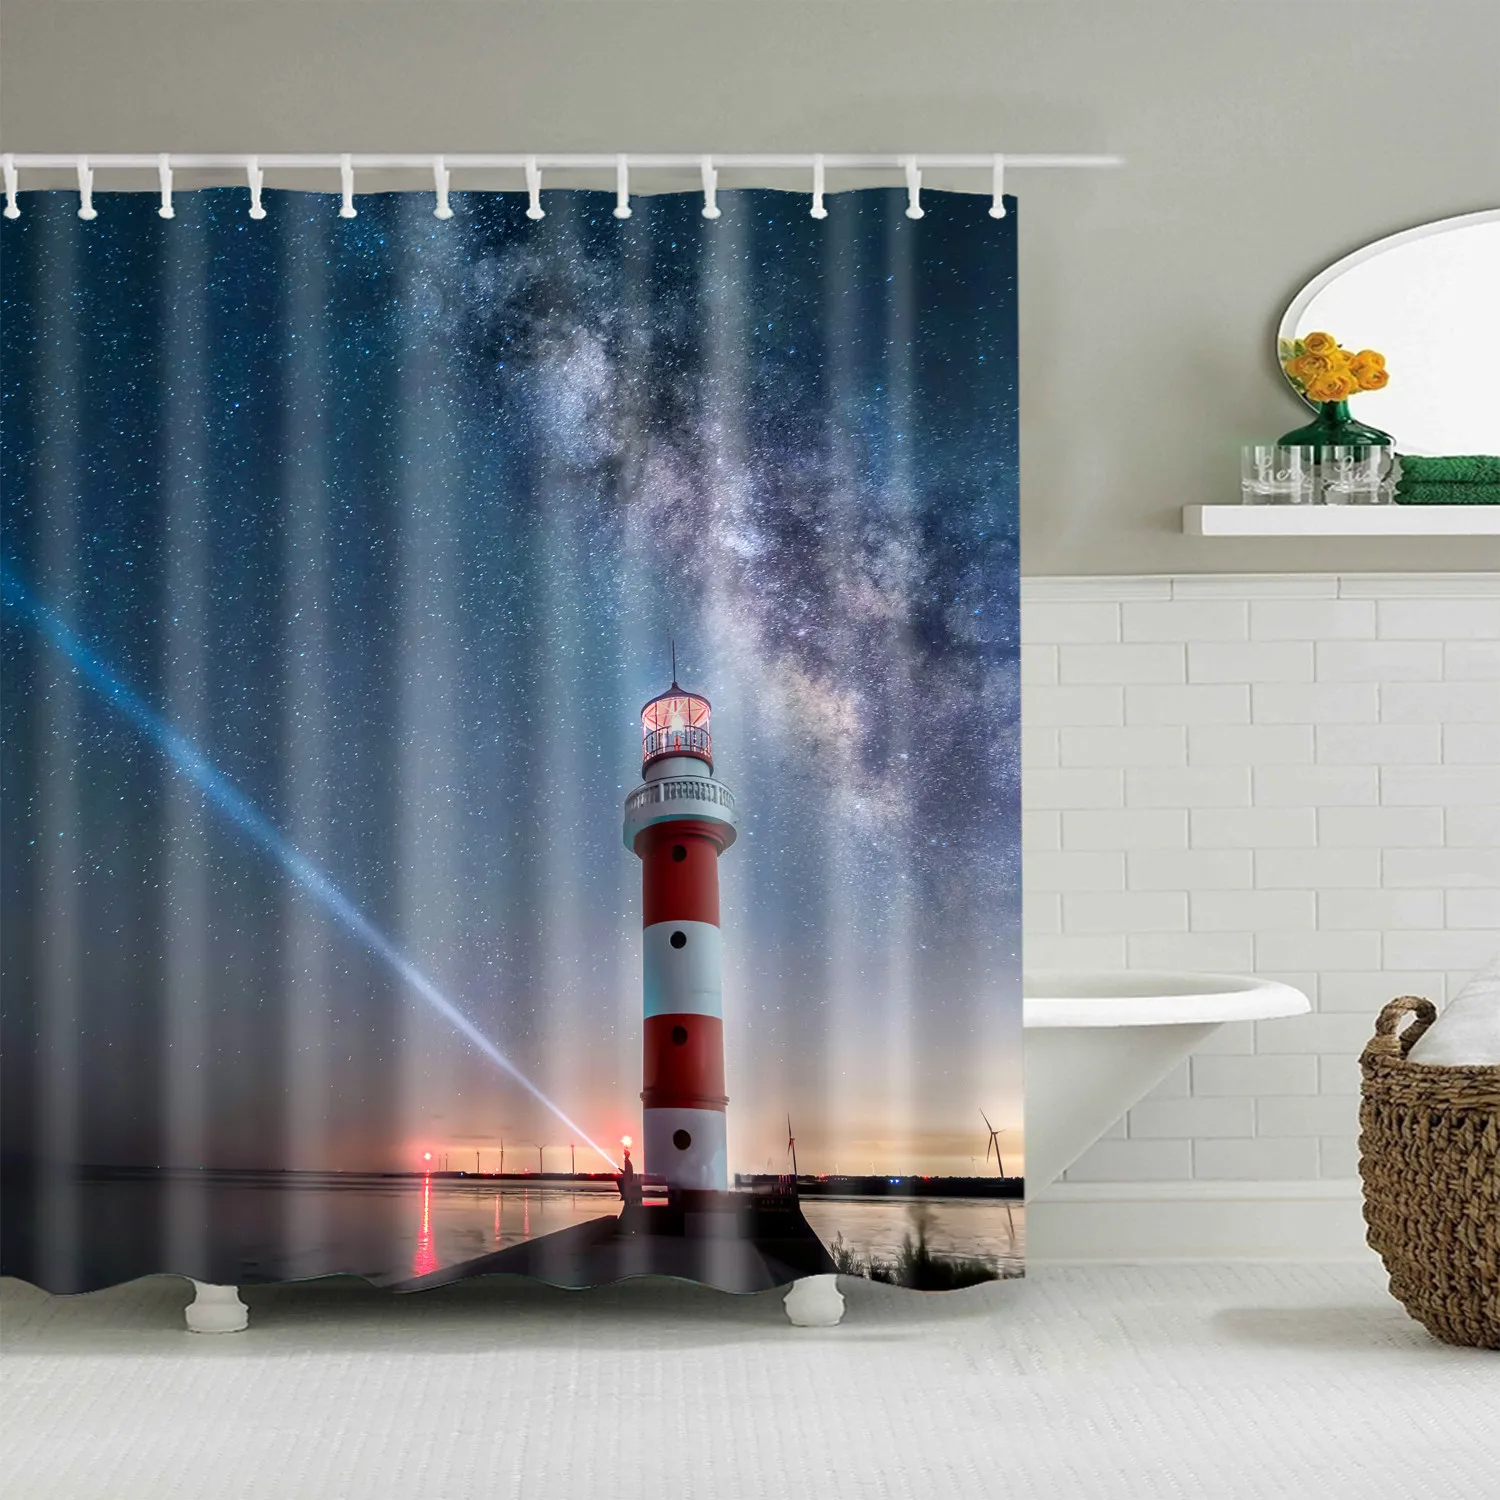 

Lighthouse Galaxy Shower Curtains Dream Night Starry Sky Bathroom Decor Waterproof Polyester Fabric Hanging Curtain Set Cheap